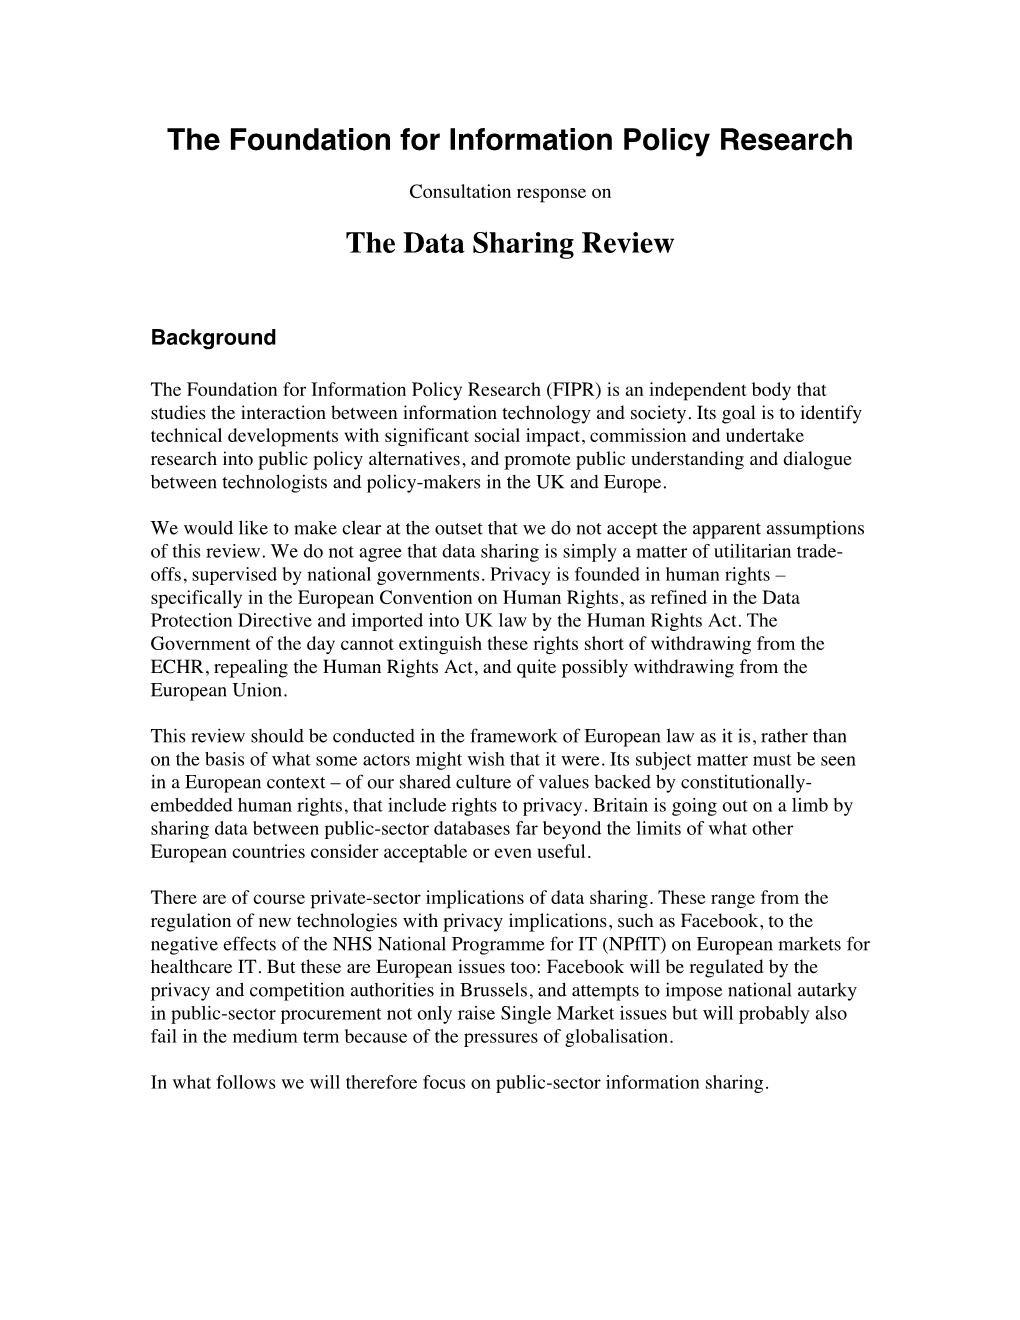 The Foundation for Information Policy Research the Data Sharing Review